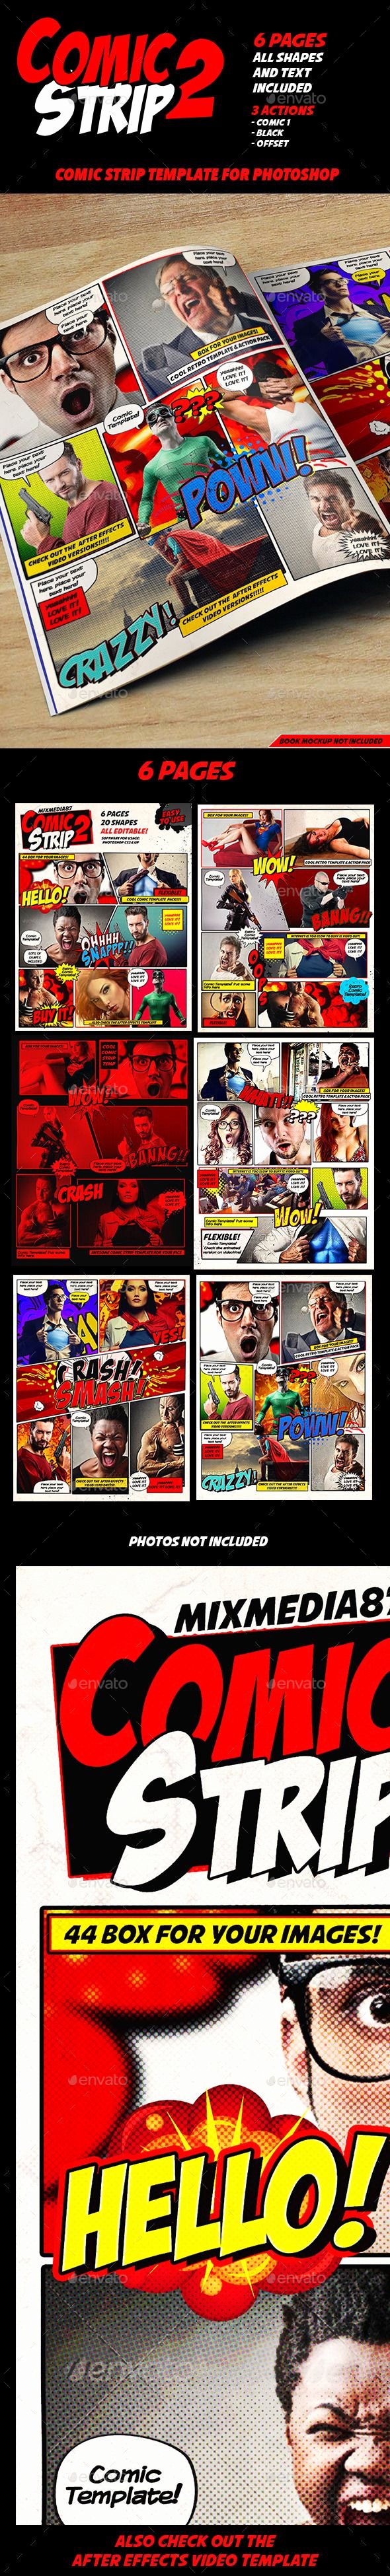 Comic Book Template Photoshop Lovely 1000 Images About Shop Files On Pinterest